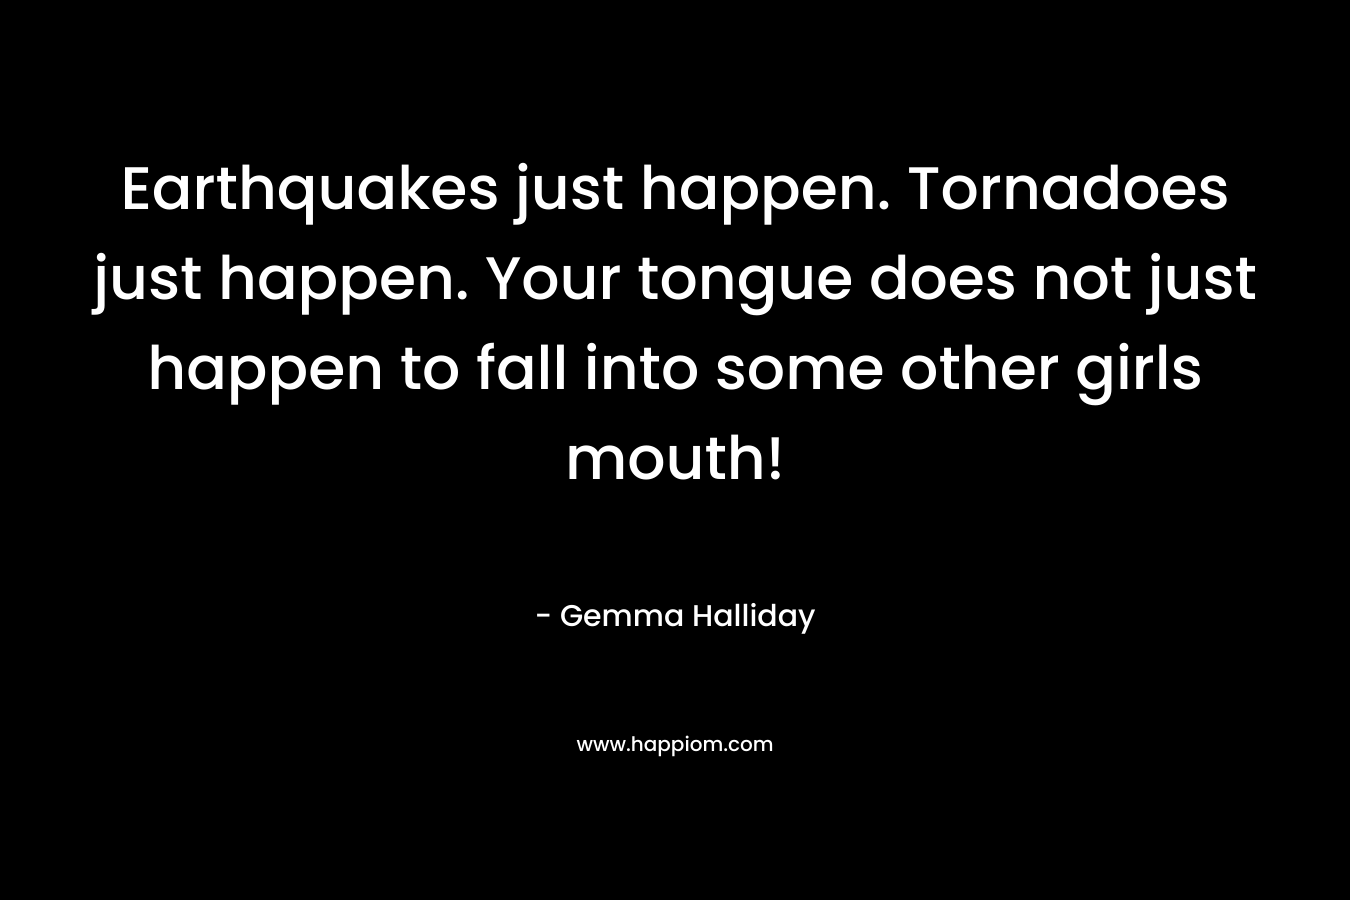 Earthquakes just happen. Tornadoes just happen. Your tongue does not just happen to fall into some other girls mouth!